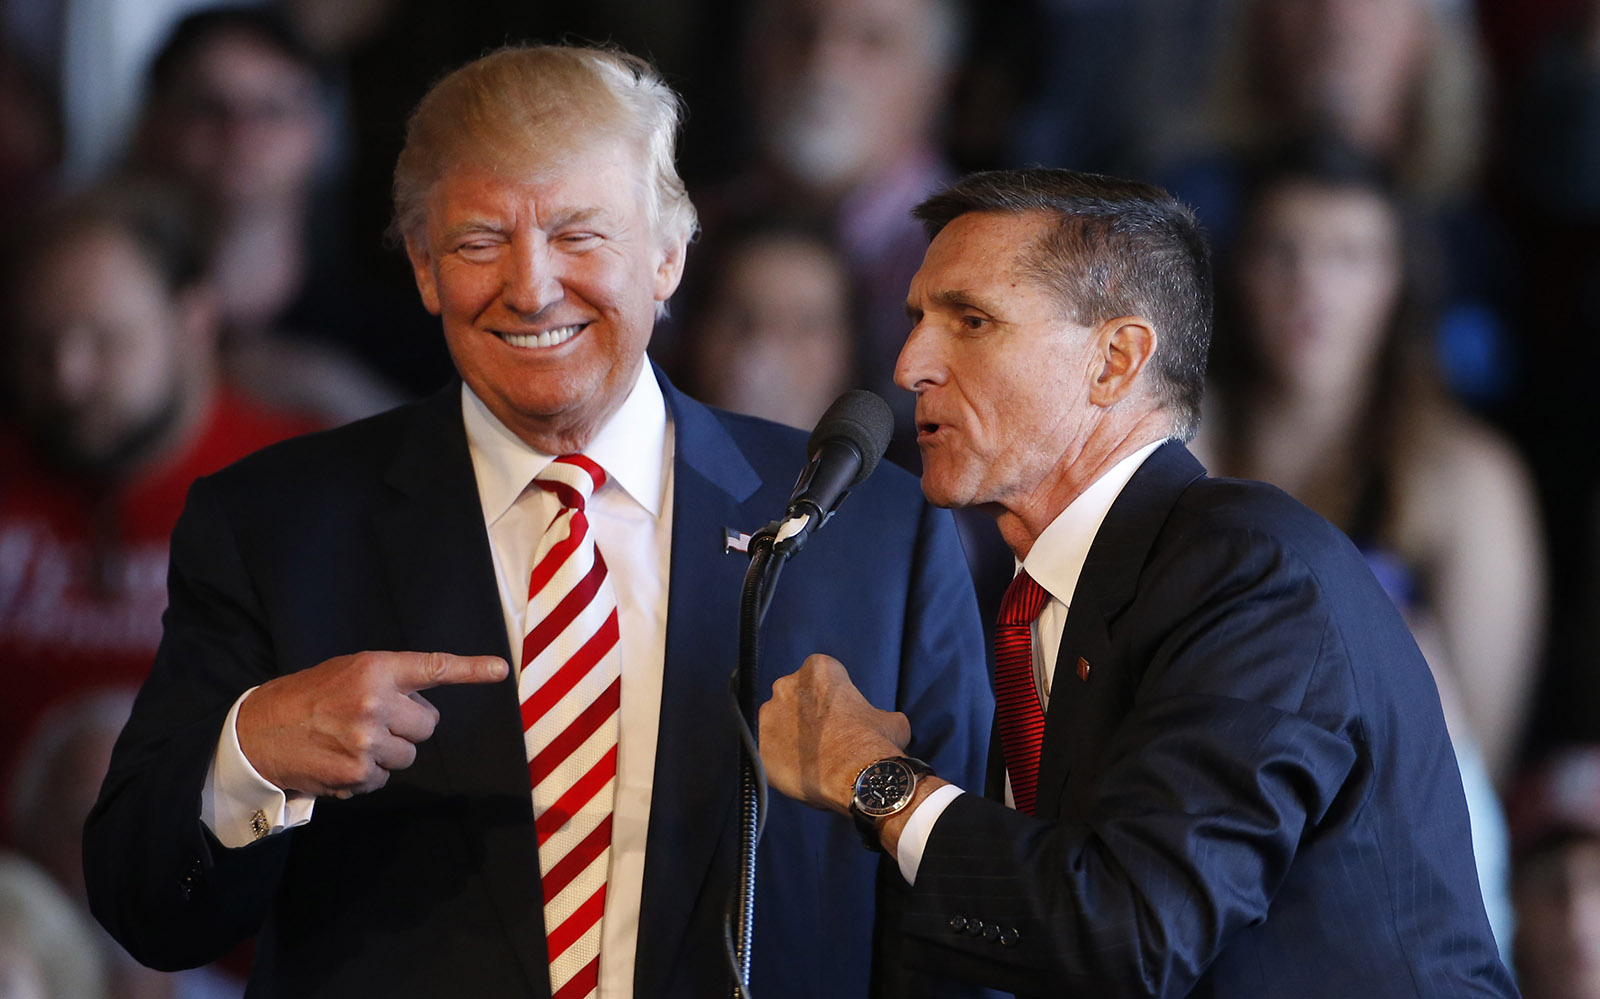 Donald Trump with Lt. Gen. Michael Flynn at a presidential campaign stop in Grand Junction, Colorado, October 18, 2016